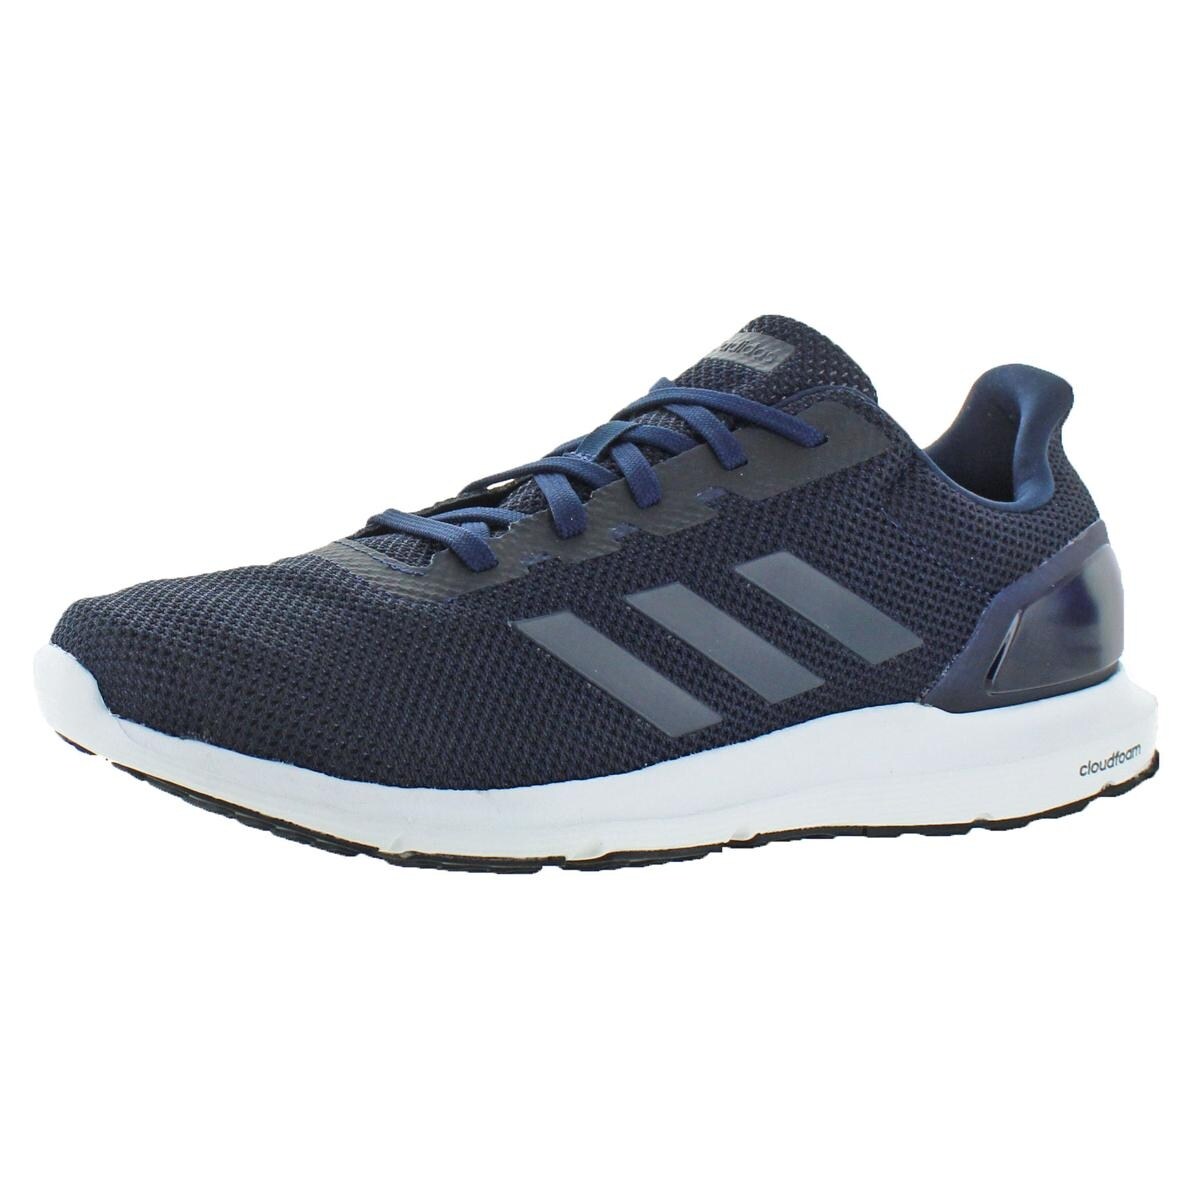 adidas shoes trainers